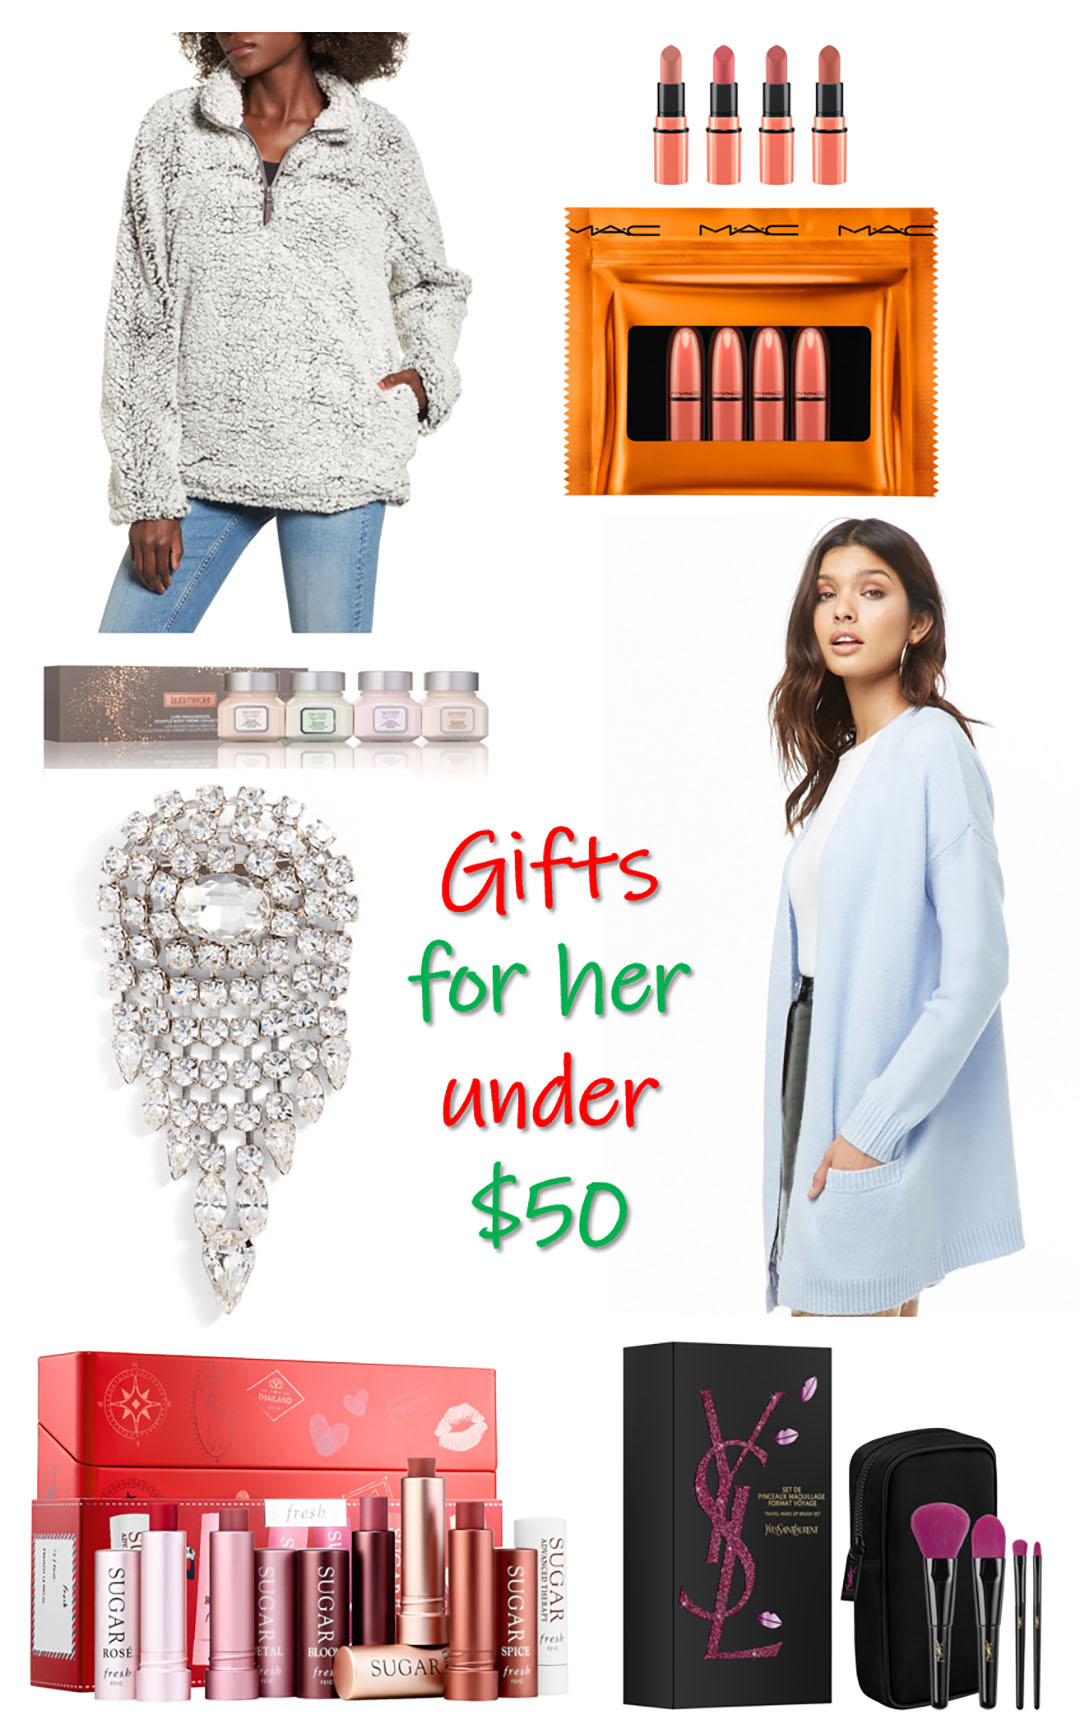 https://www.bayareafashionista.com/wp-content/uploads/2018/11/gifts-for-her-under-50-holiday-gift-guide.jpg